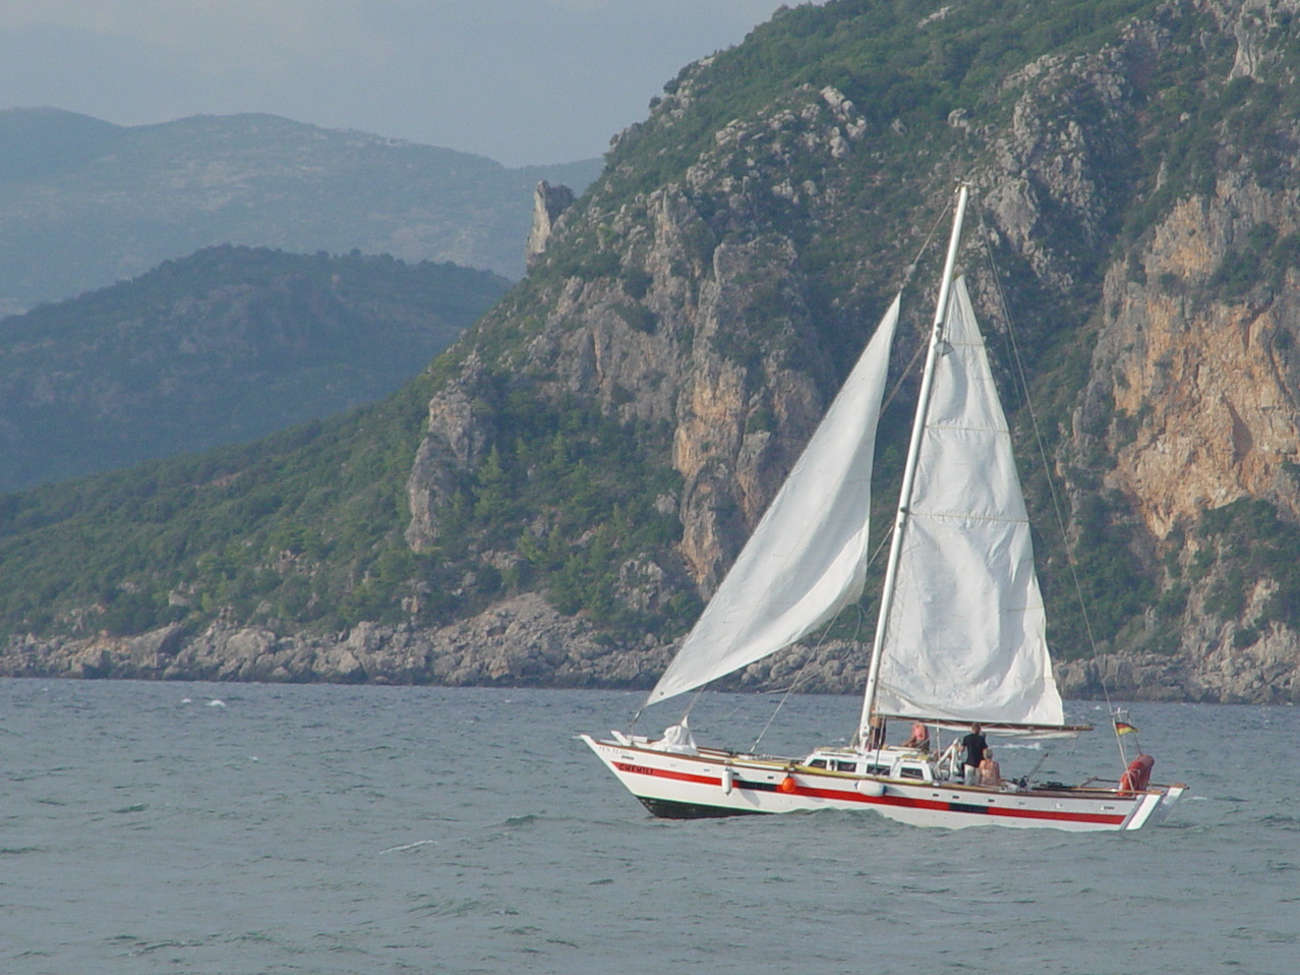 Red and white Narai, two people aboard, sailing against a backdrop of mountains covered in greenery